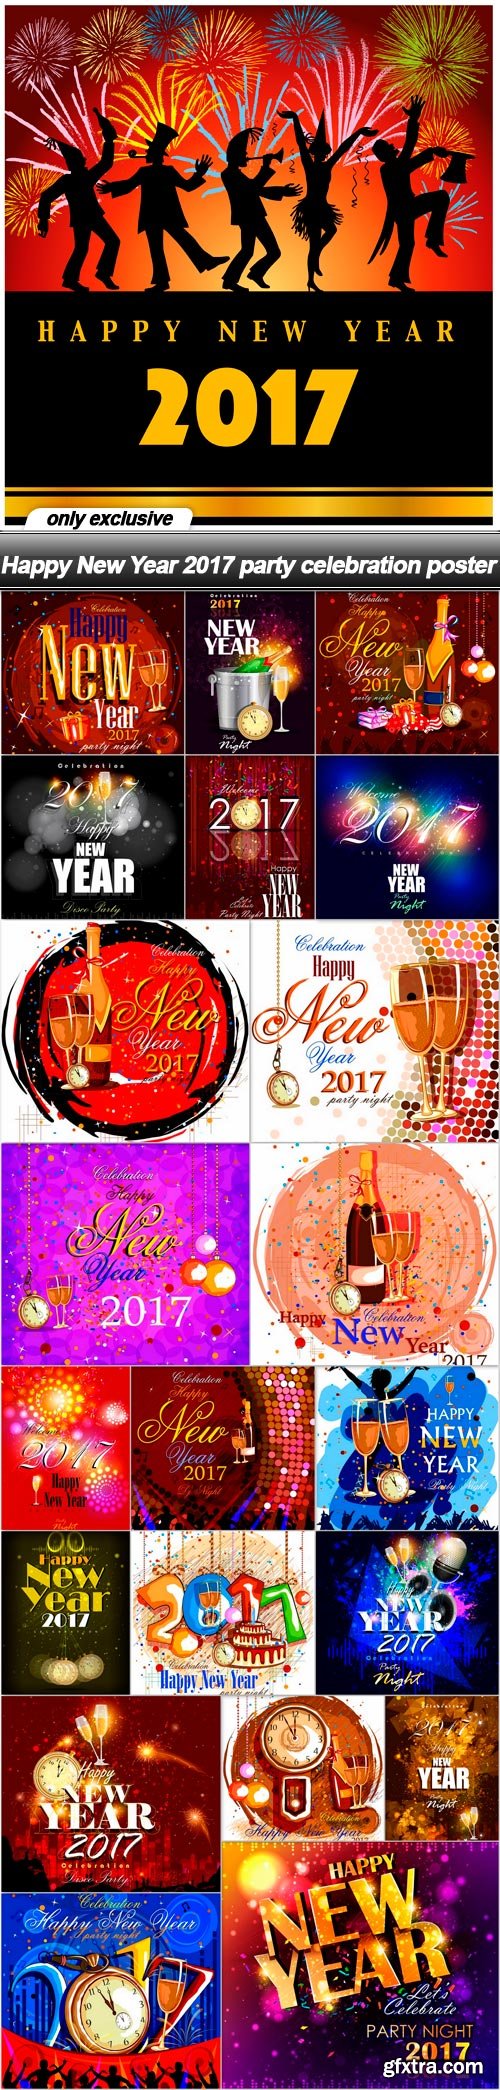 Happy New Year 2017 party celebration poster - 22 EPS